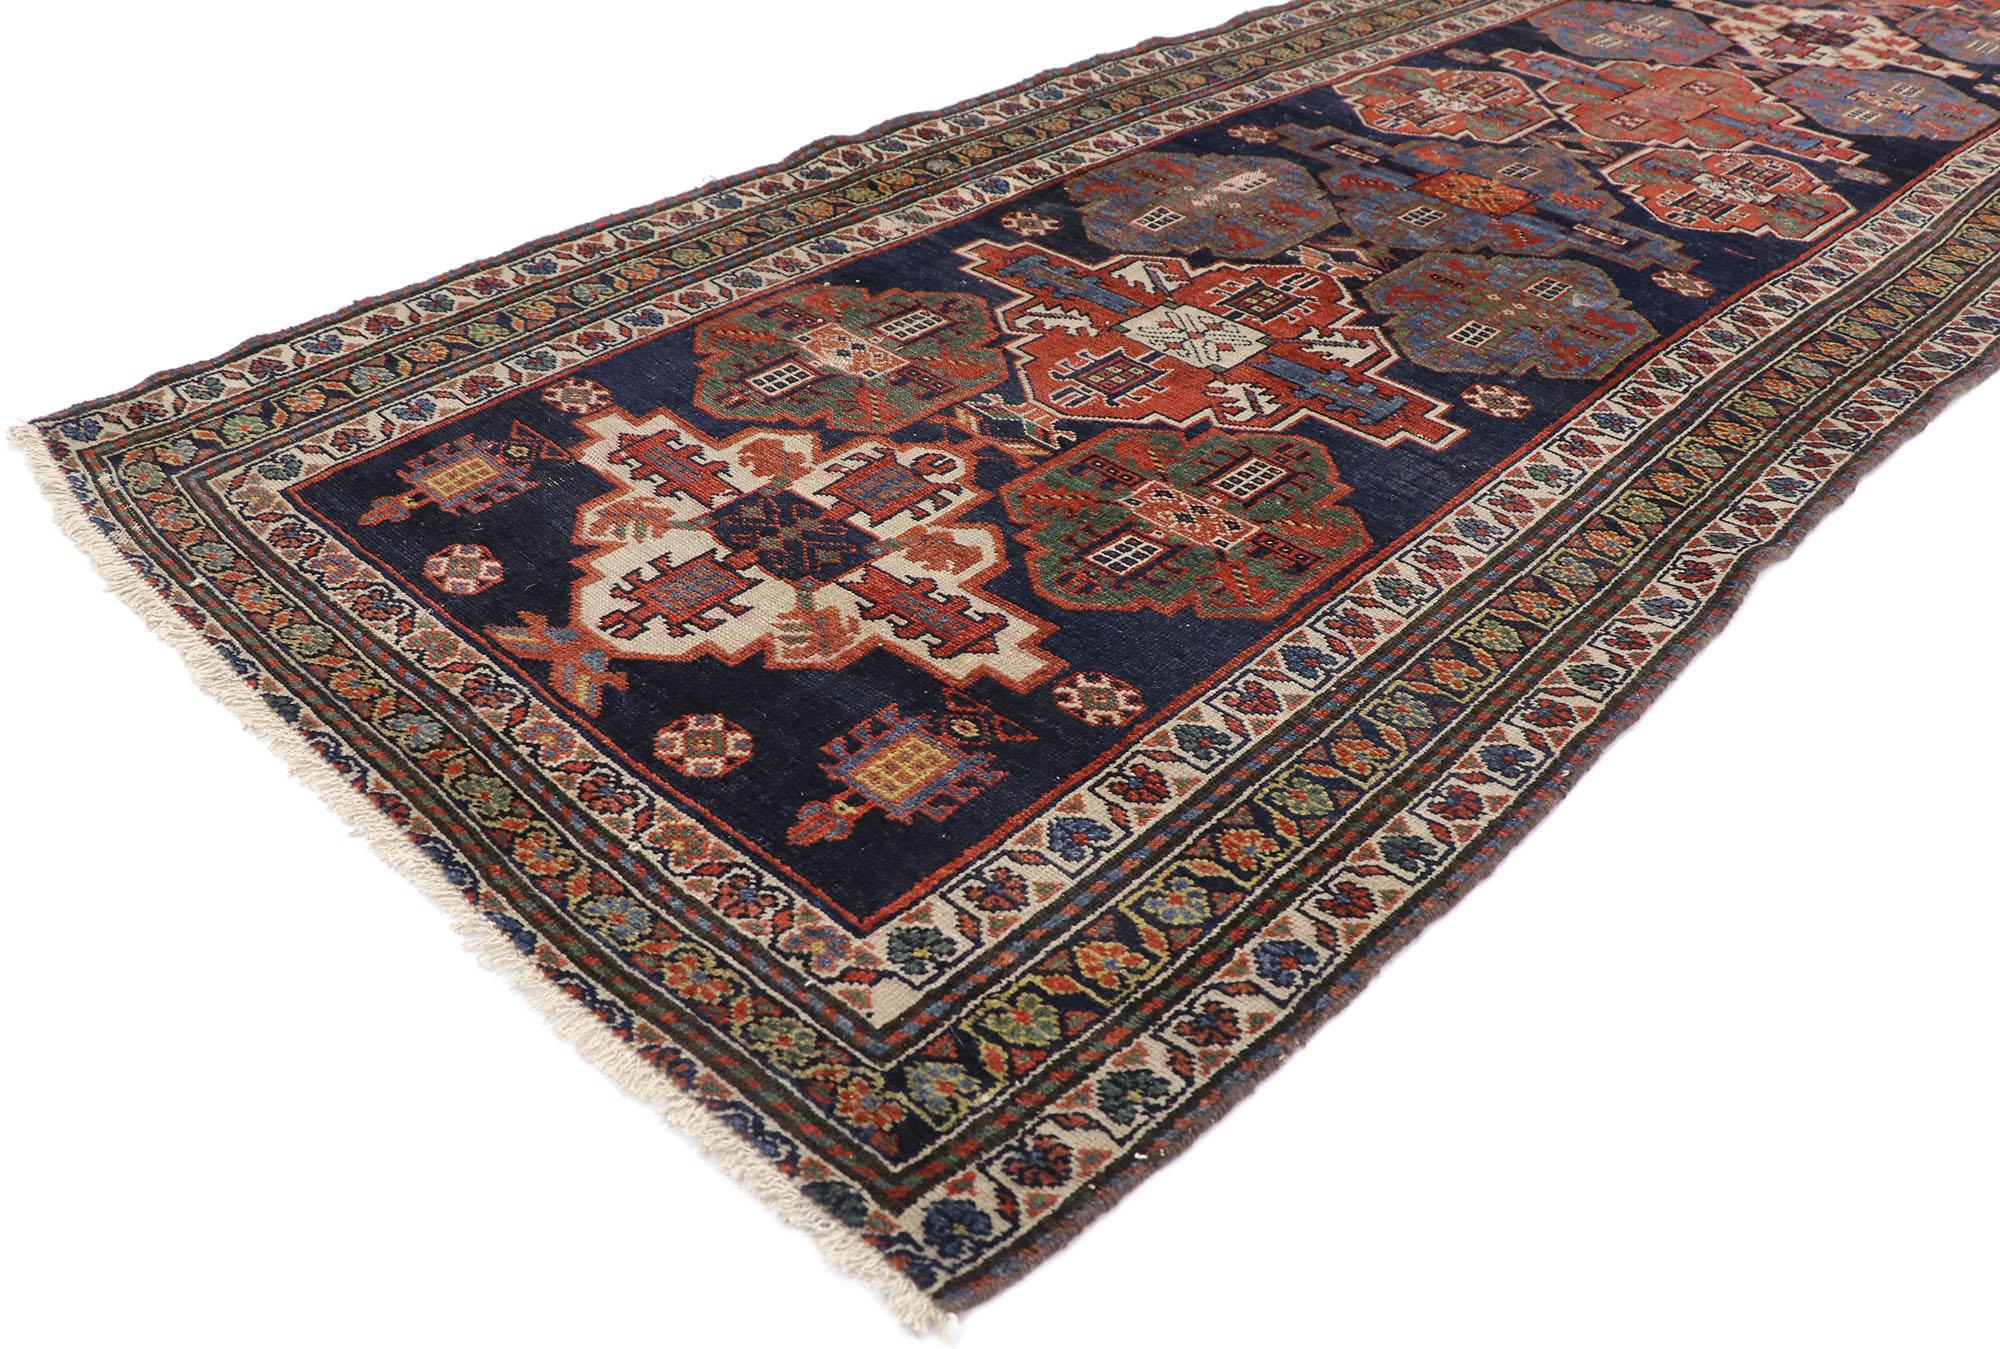 77015, antique Persian Malayer runner with modern tribal style, long hallway runner. This antique Persian Malayer runner with modern tribal style communicates some of the finer and more important points of geometric design elements. Classically